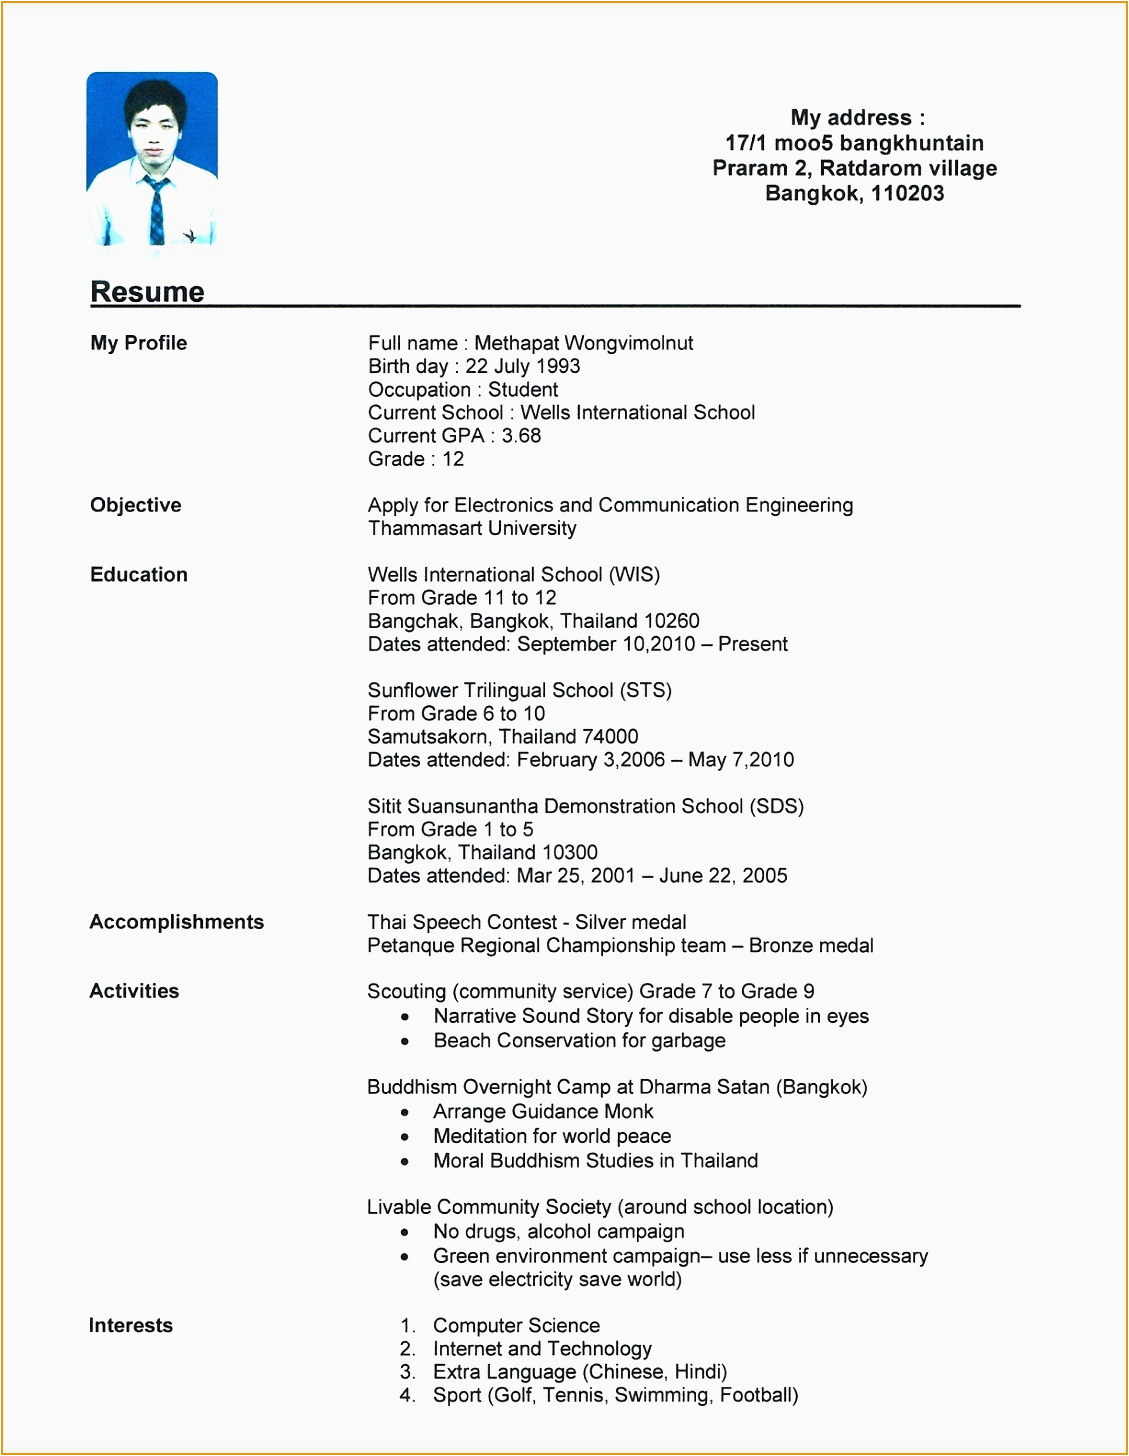 Sample Resume format for Students with No Experience 6 Resume Templates College Student No Job Experience